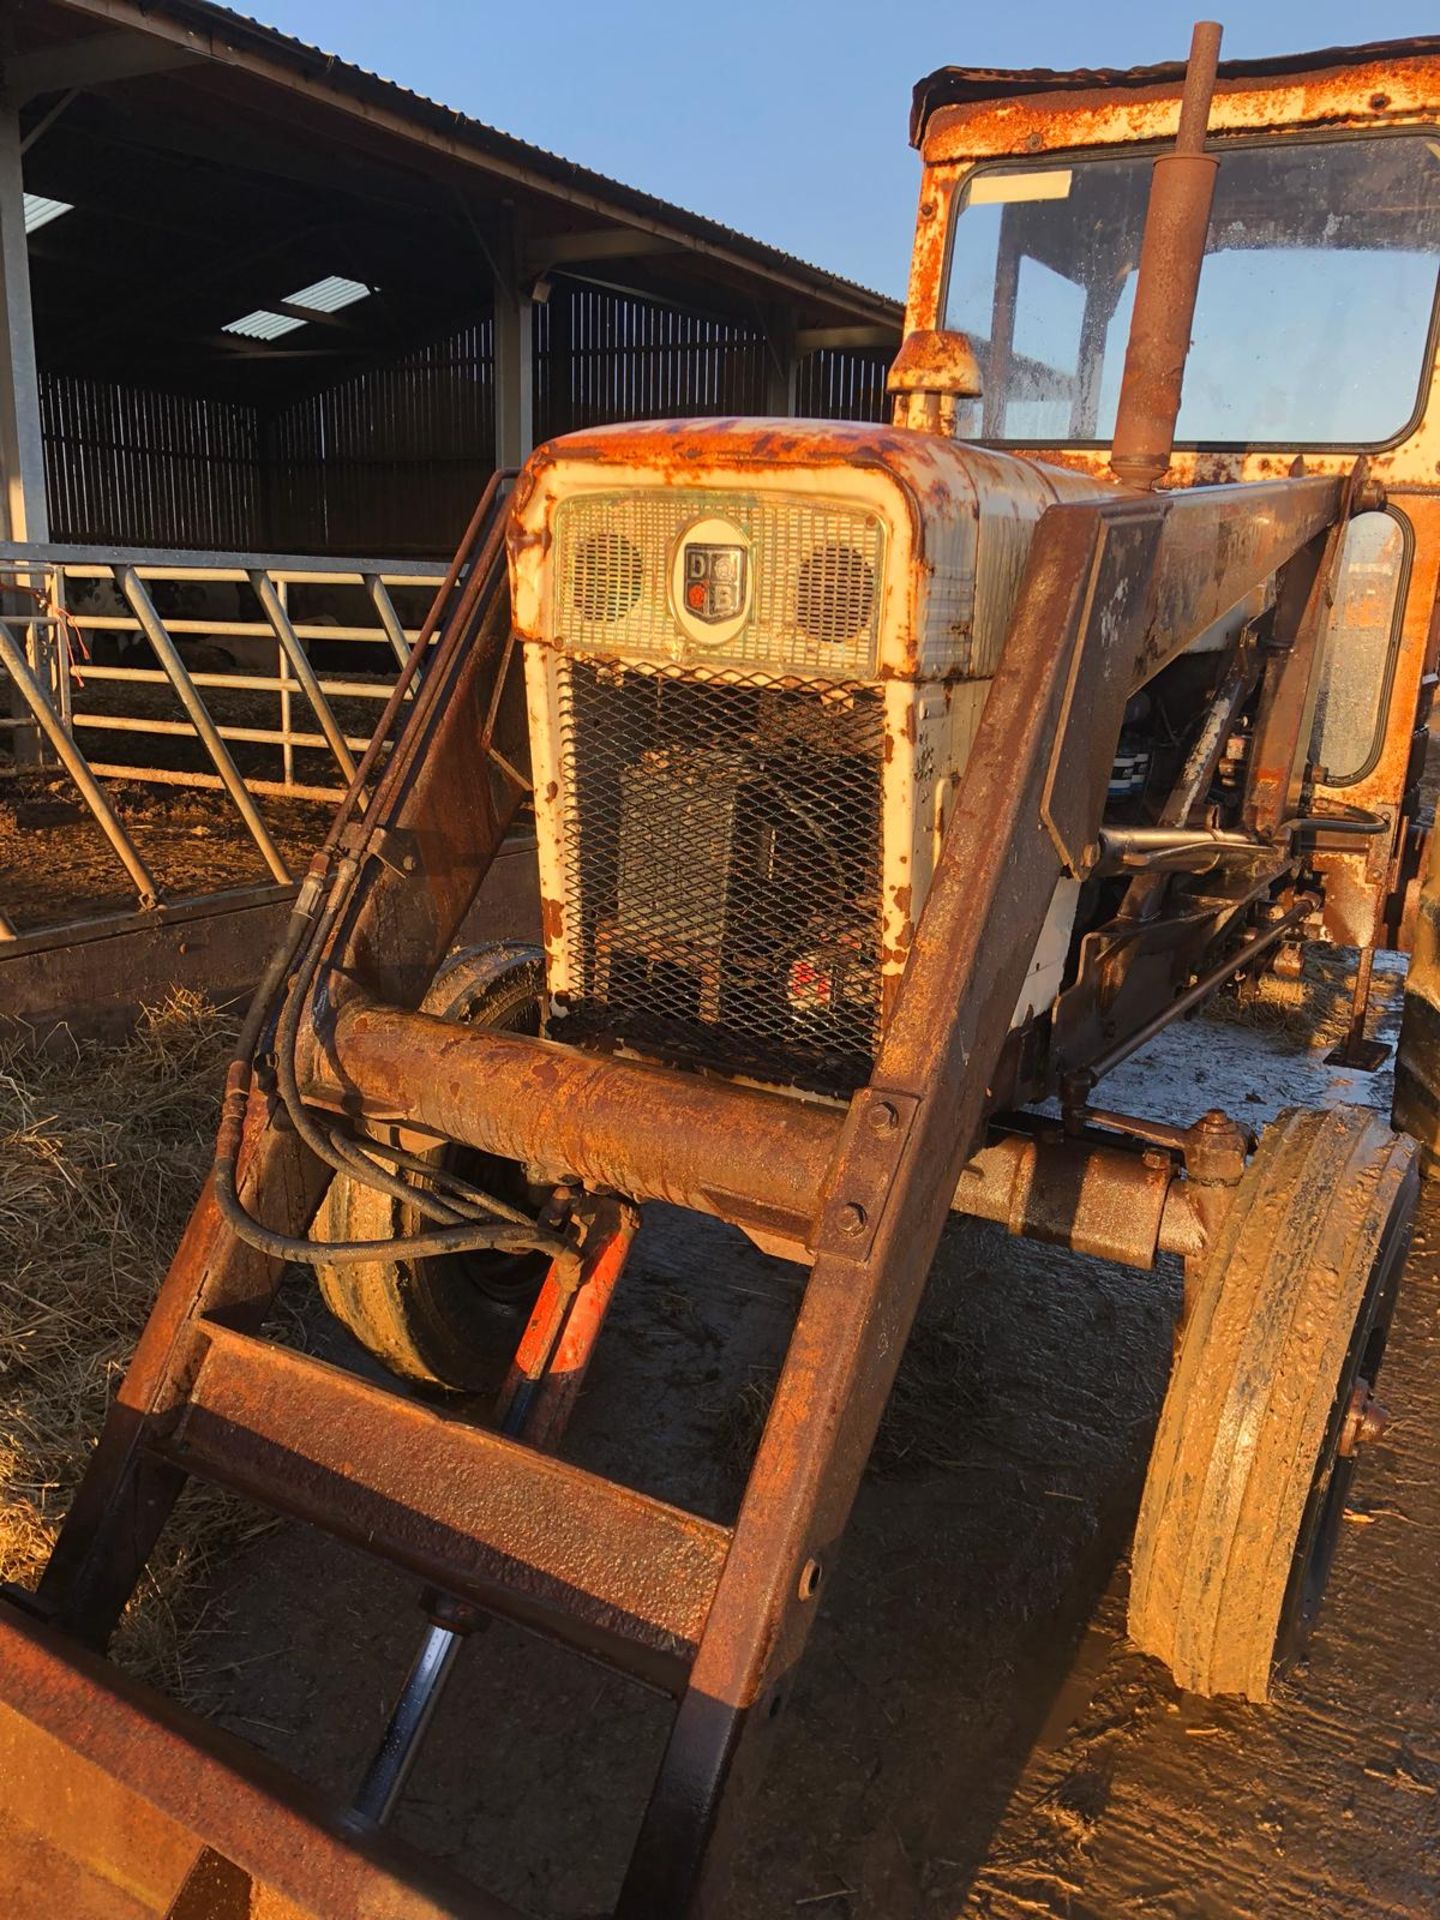 1971 DAVID BROWN 1200 TRACTOR, STARTS WITH A JUMP PACK, DRIVES AND LIFTS *PLUS VAT* - Image 5 of 16